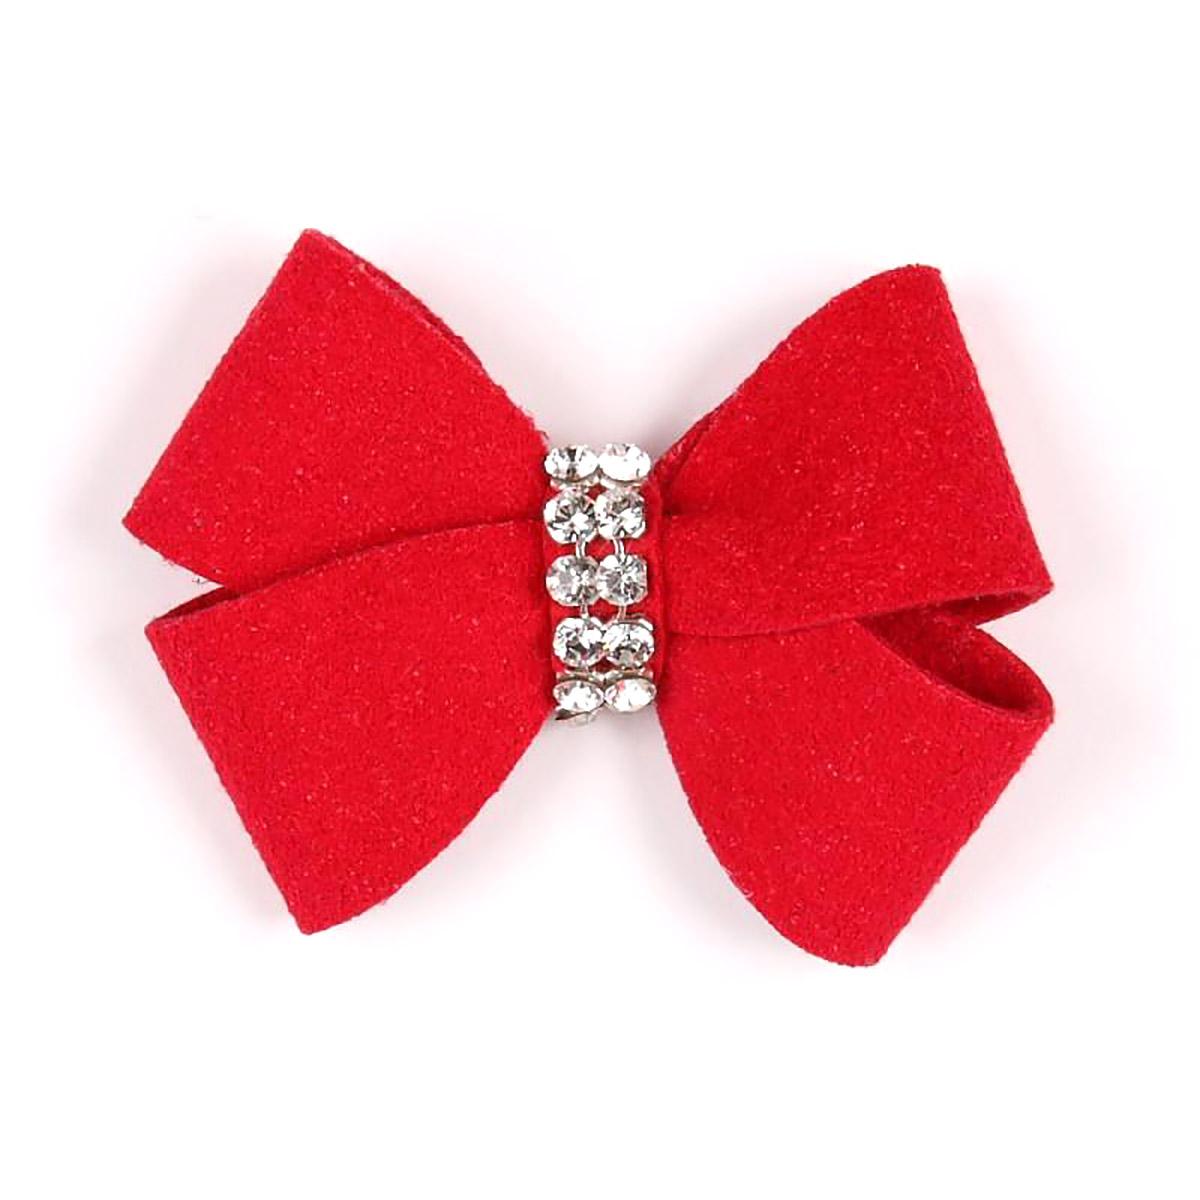 Nouveau Bow Dog Hair Bow by Susan Lanci - Red